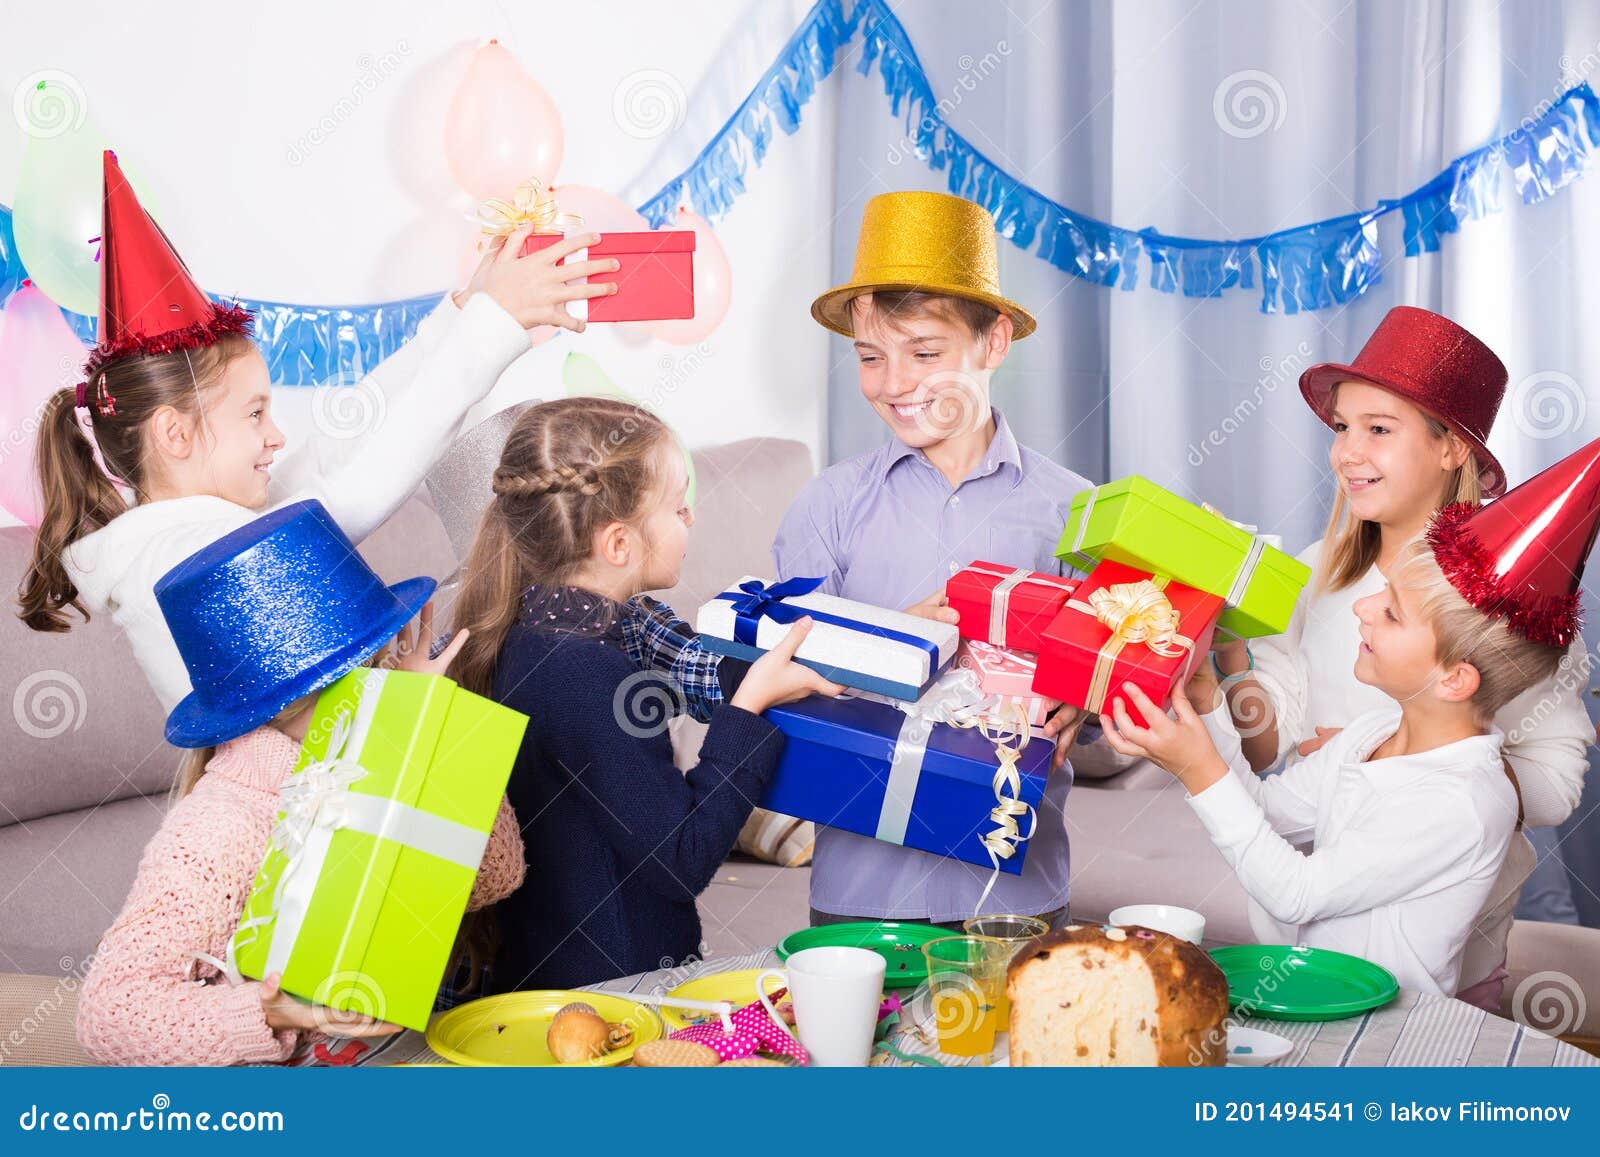 Group of Children Handing Gifts To Birthday Boy Stock Image - Image of ...